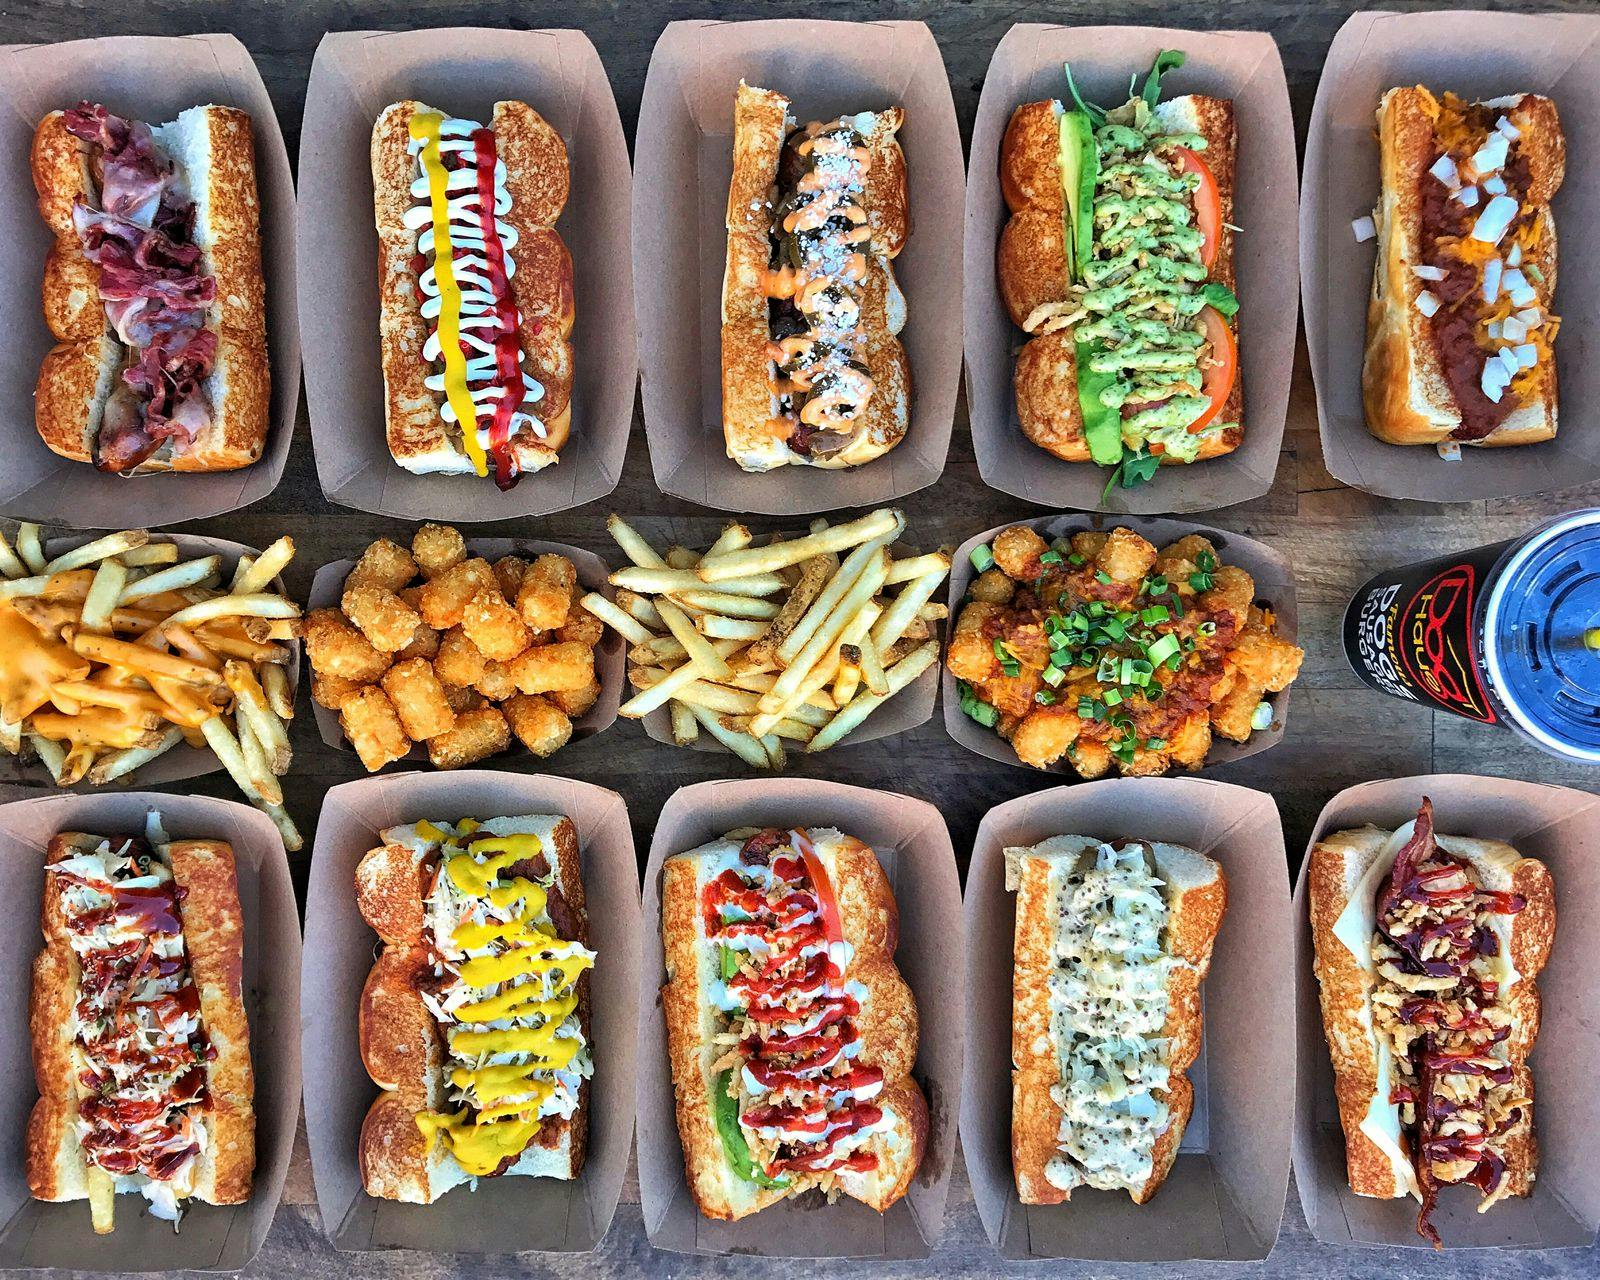 Image of 10 assorted Dog Haus hot dogs with french fries and tater tots in the middle